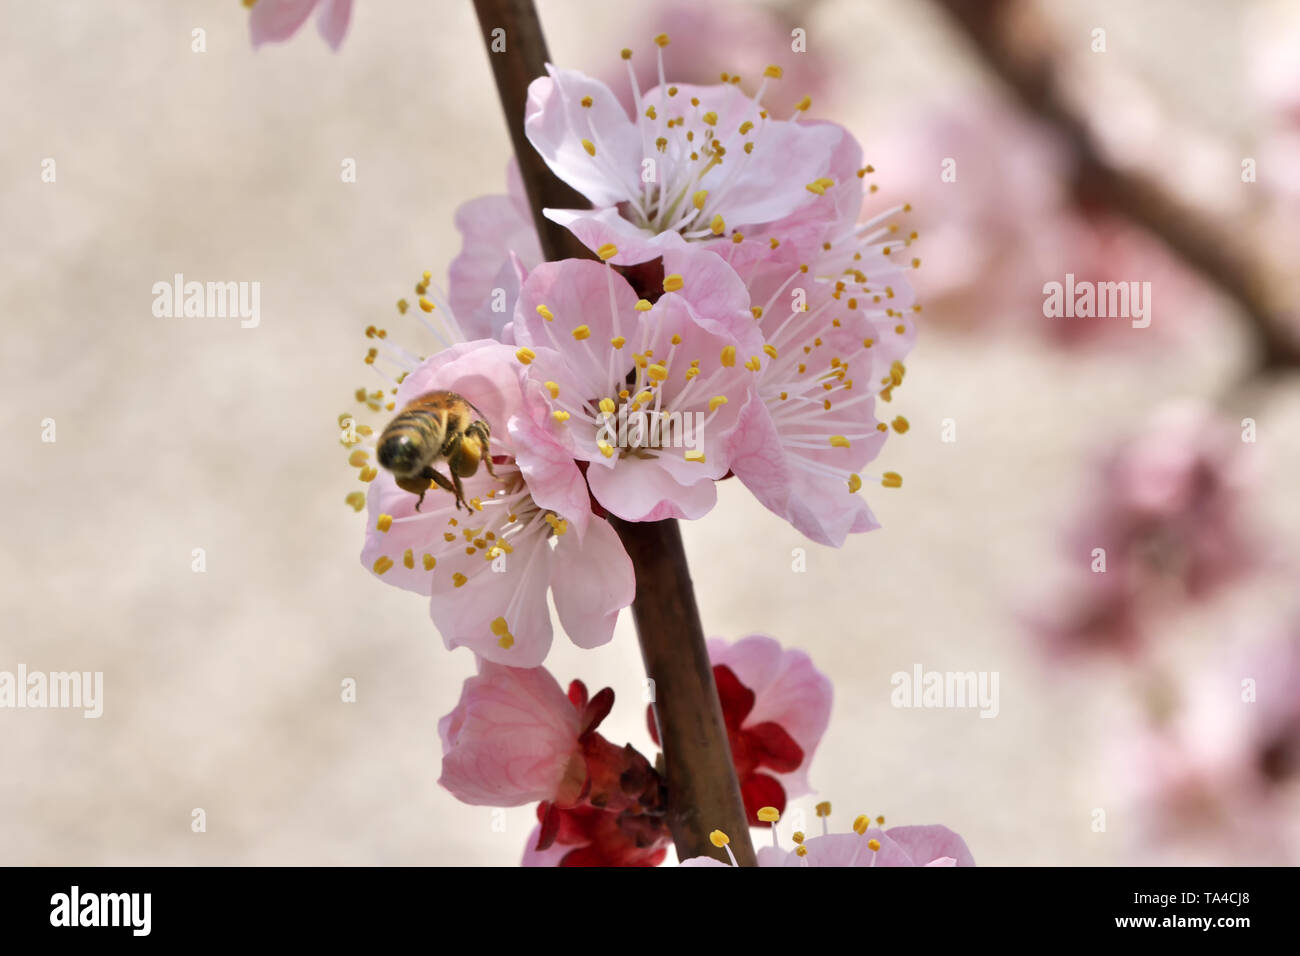 Closeup apricot flowers bloom on a bright sunny spring day in a fruit garden close-up macro photography Stock Photo